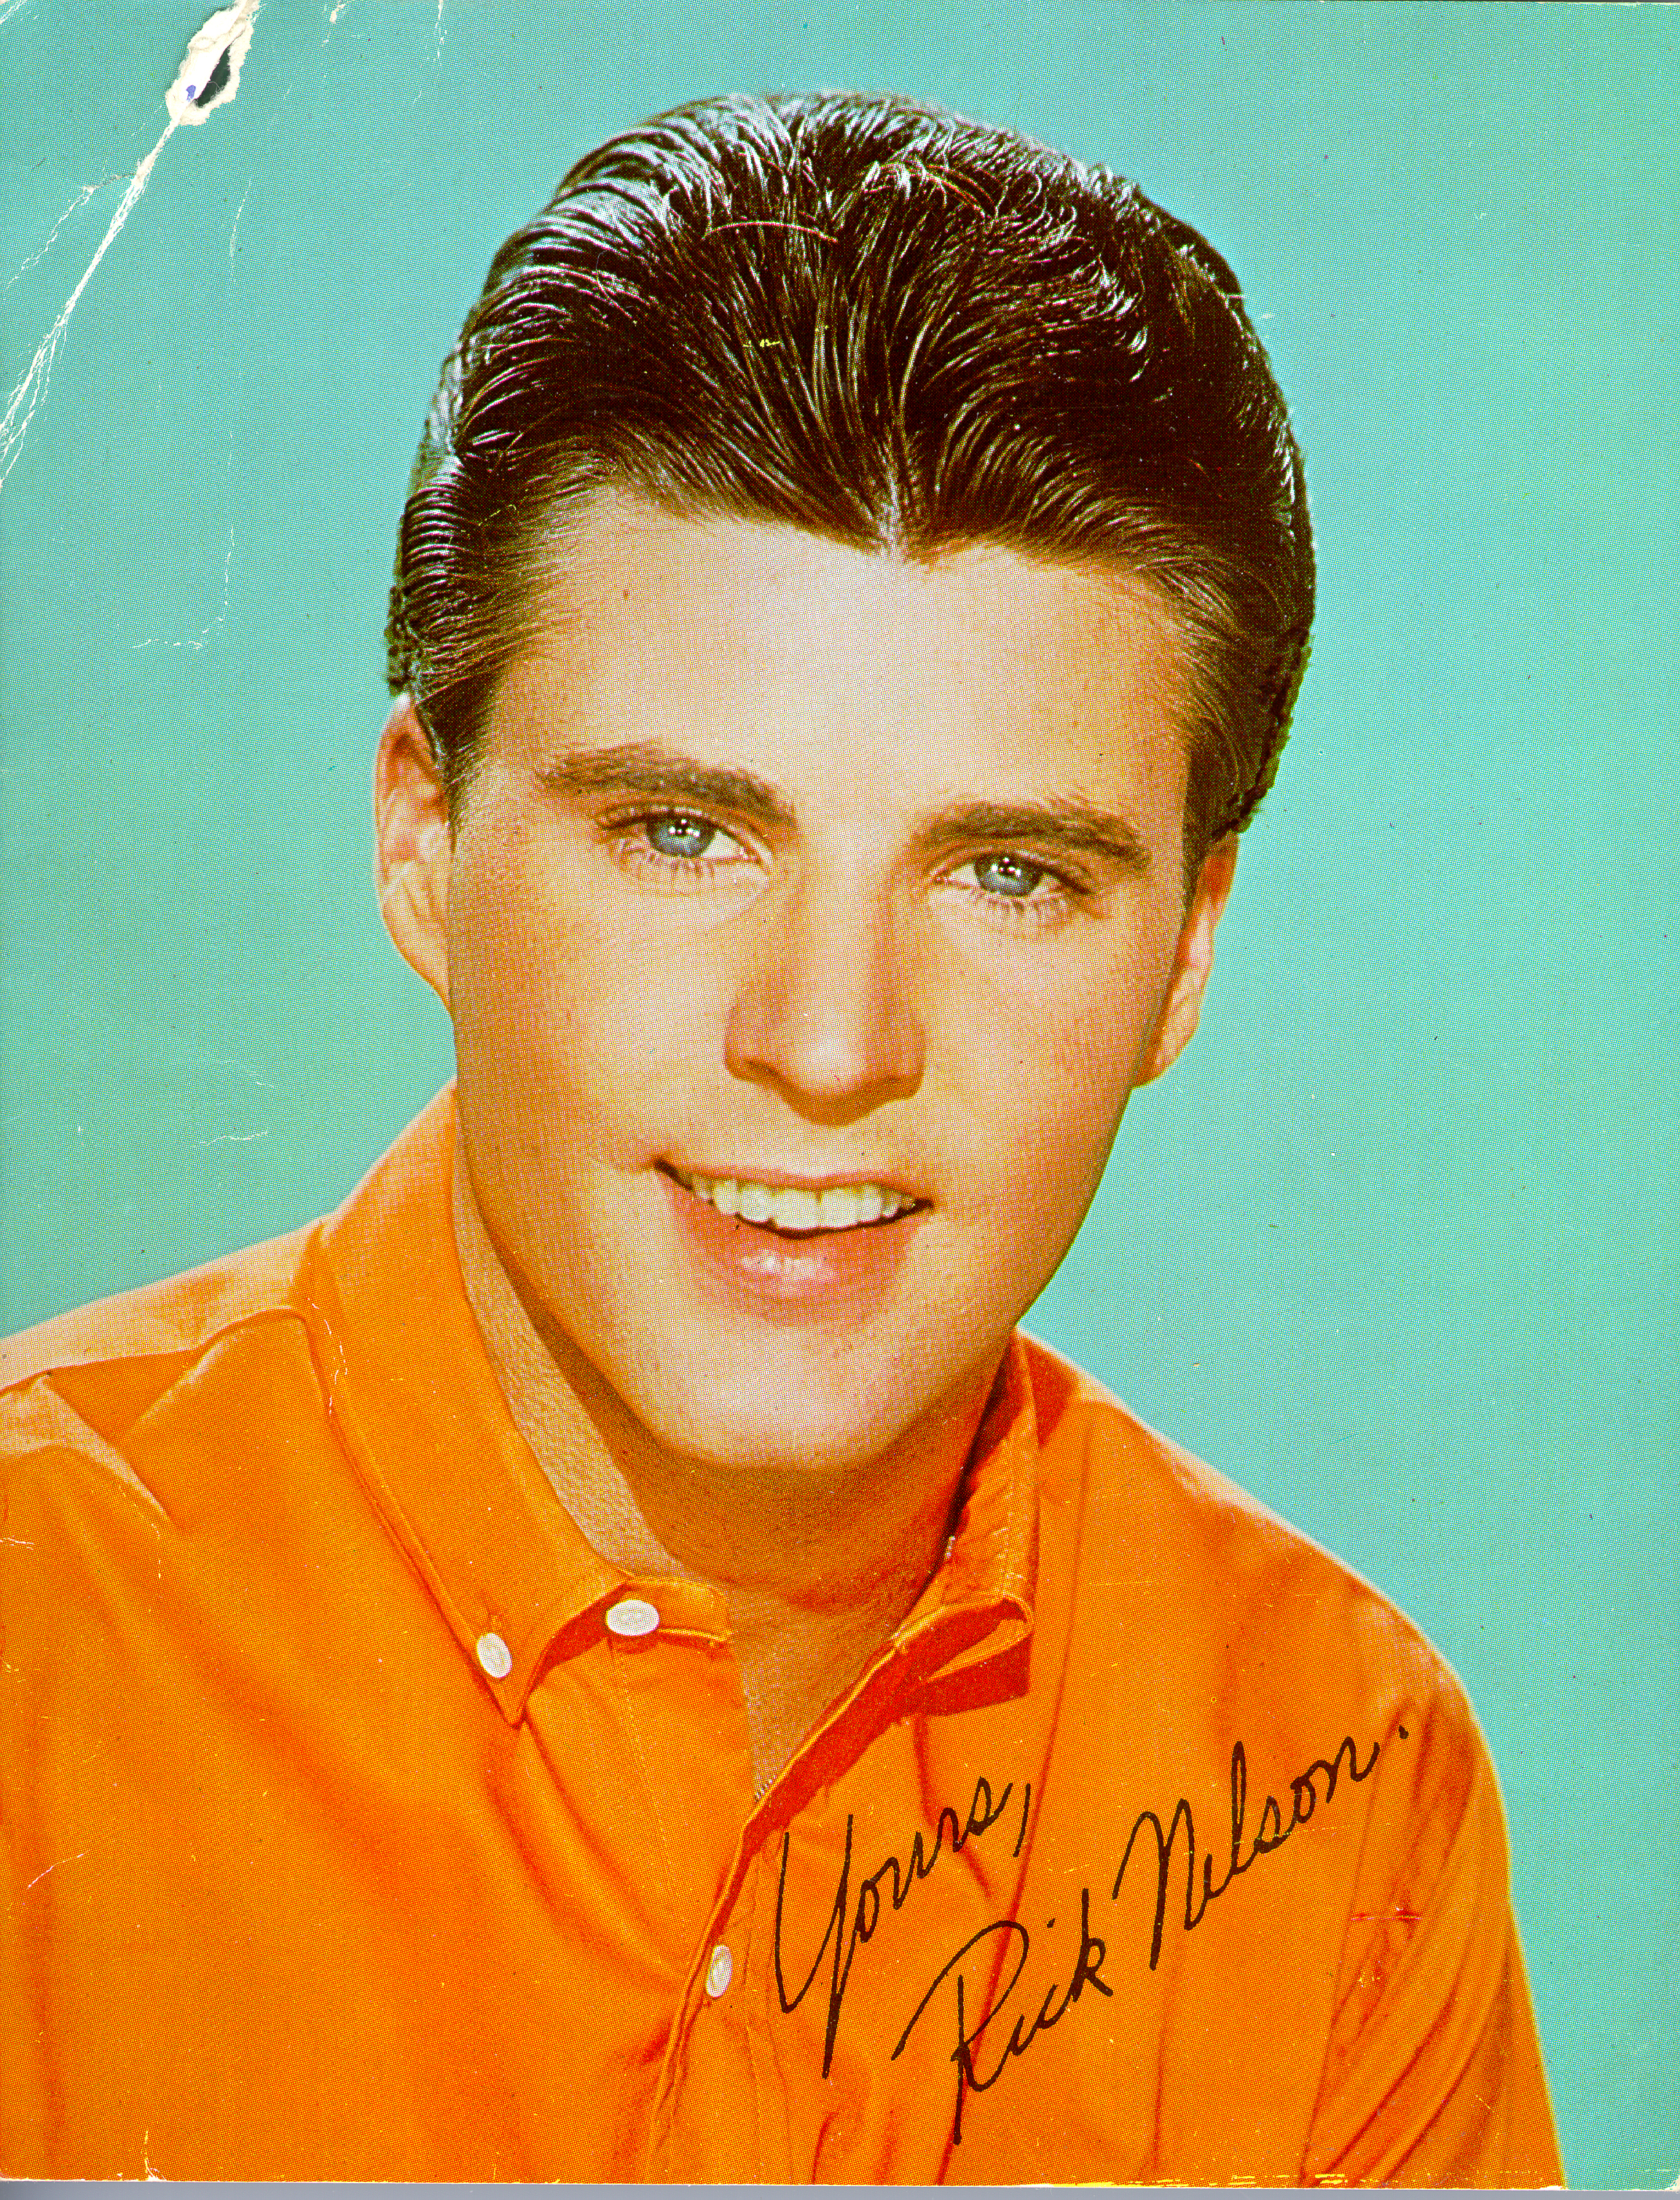 Rick Nelson poses for a portrait in circa 1957 | Source: Getty Images